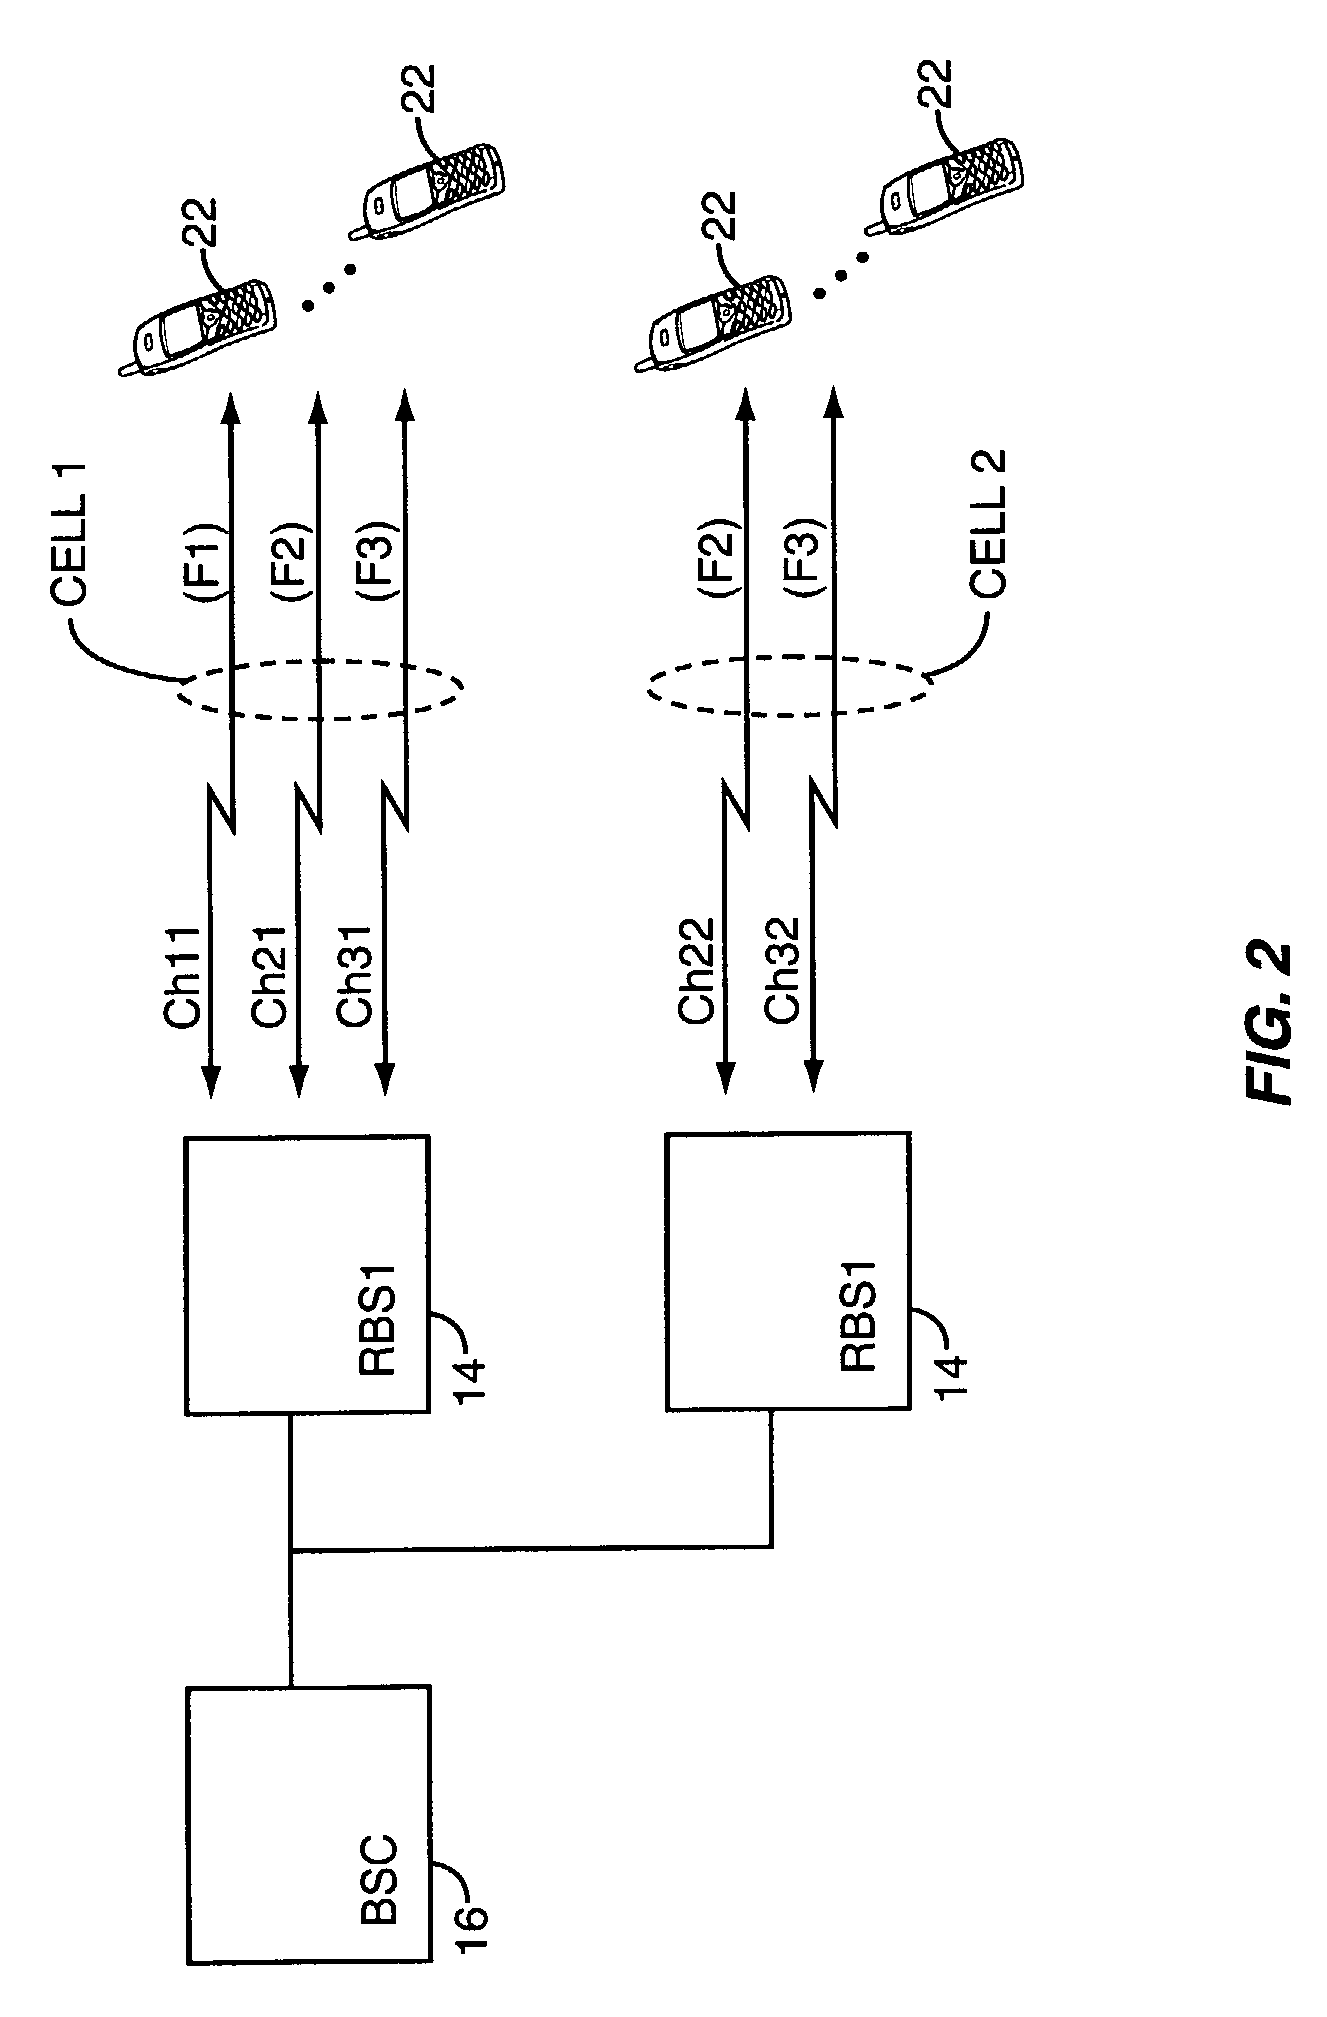 Hard handoff target generation in a multi-frequency CDMA mobile network